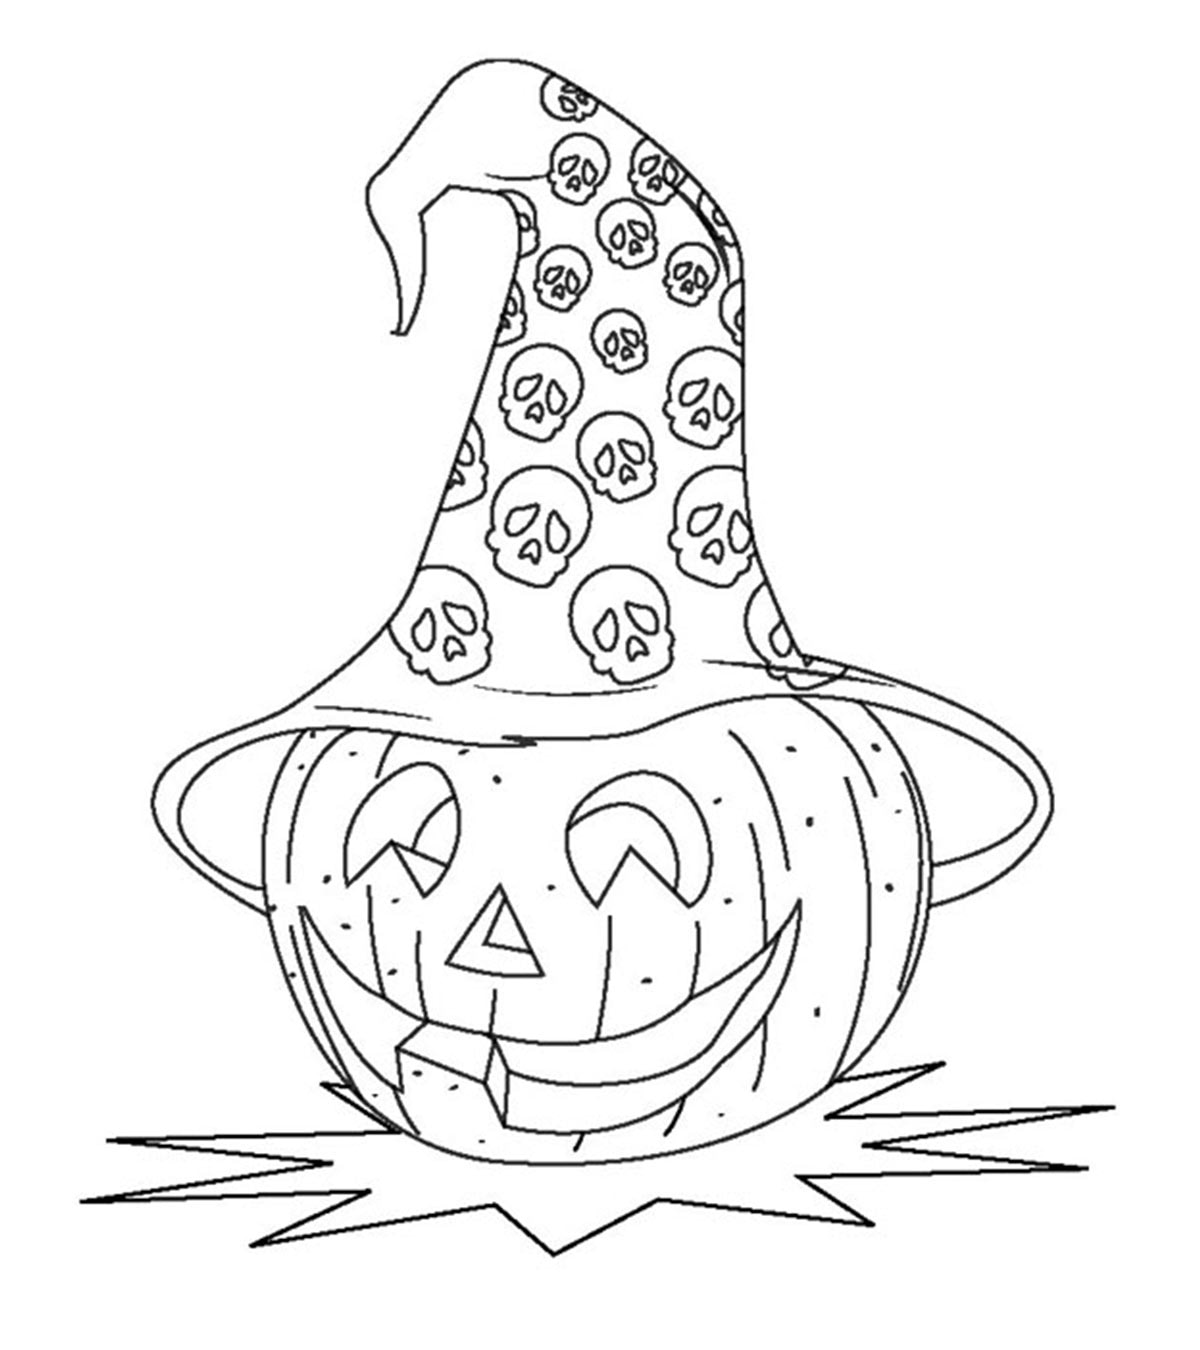 10 Cute Halloween Pumpkin Coloring Pages Your Toddler Will Love To Color